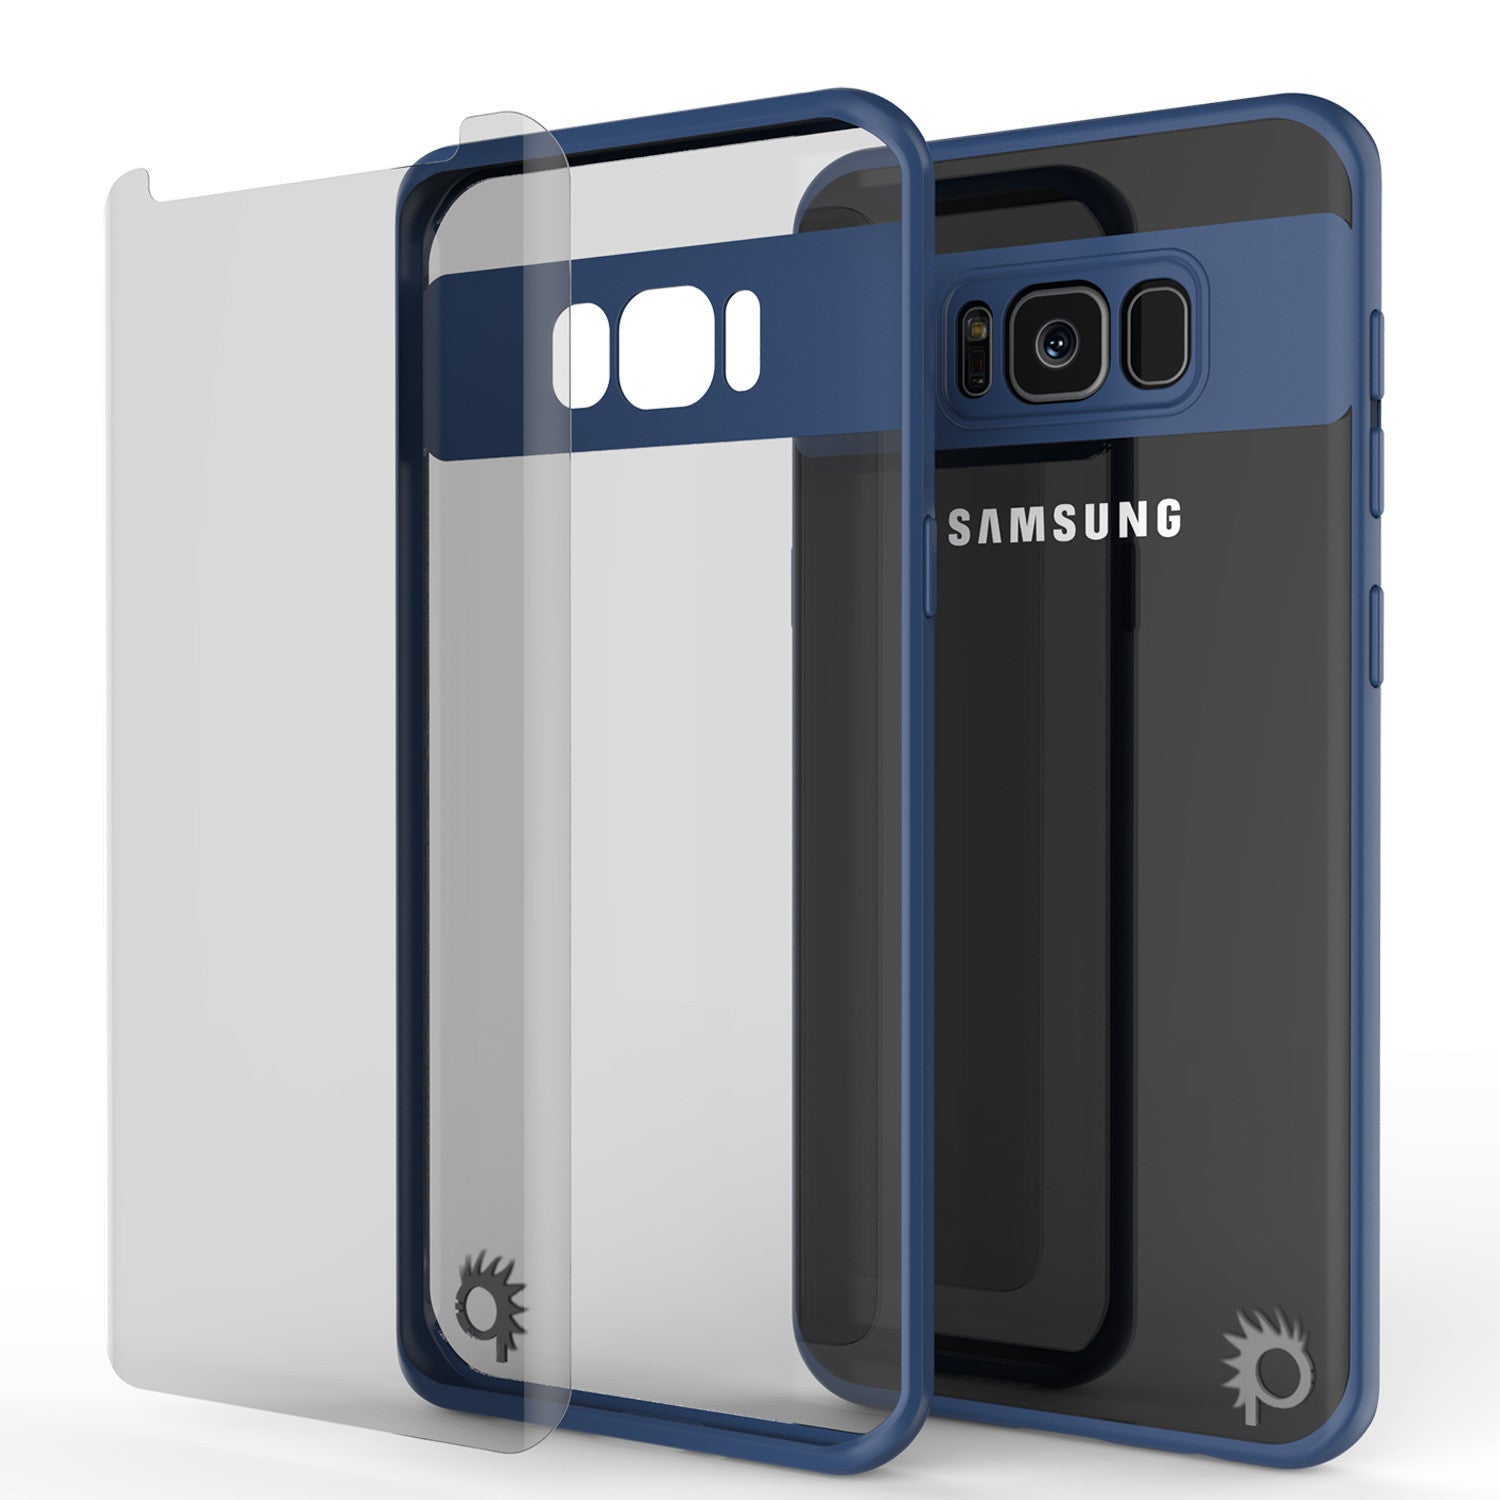 Galaxy S8 Case, Punkcase [MASK Series] [NAVY] Full Body Hybrid Dual Layer TPU Cover W/ Protective PUNKSHIELD Screen Protector